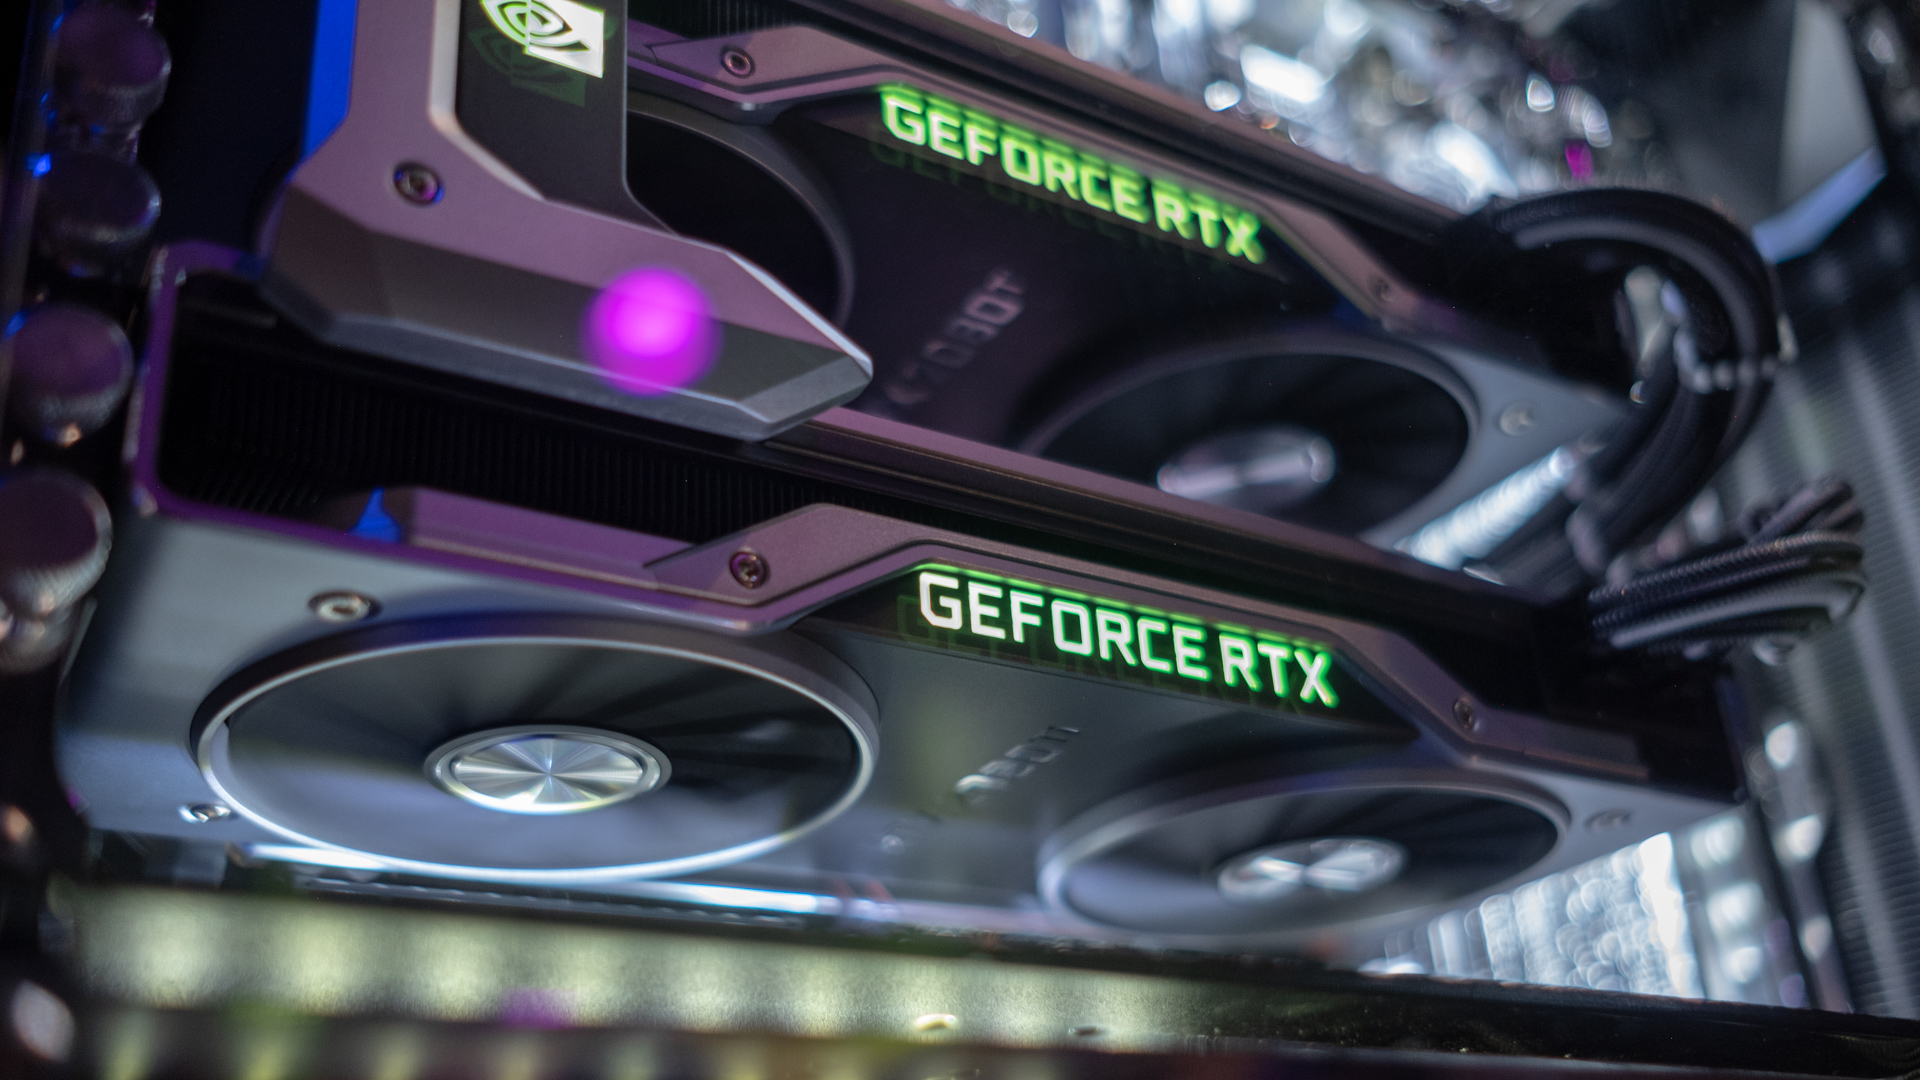 Best Nvidia Geforce Graphics Cards 2021: Finding The Best Gpu For You